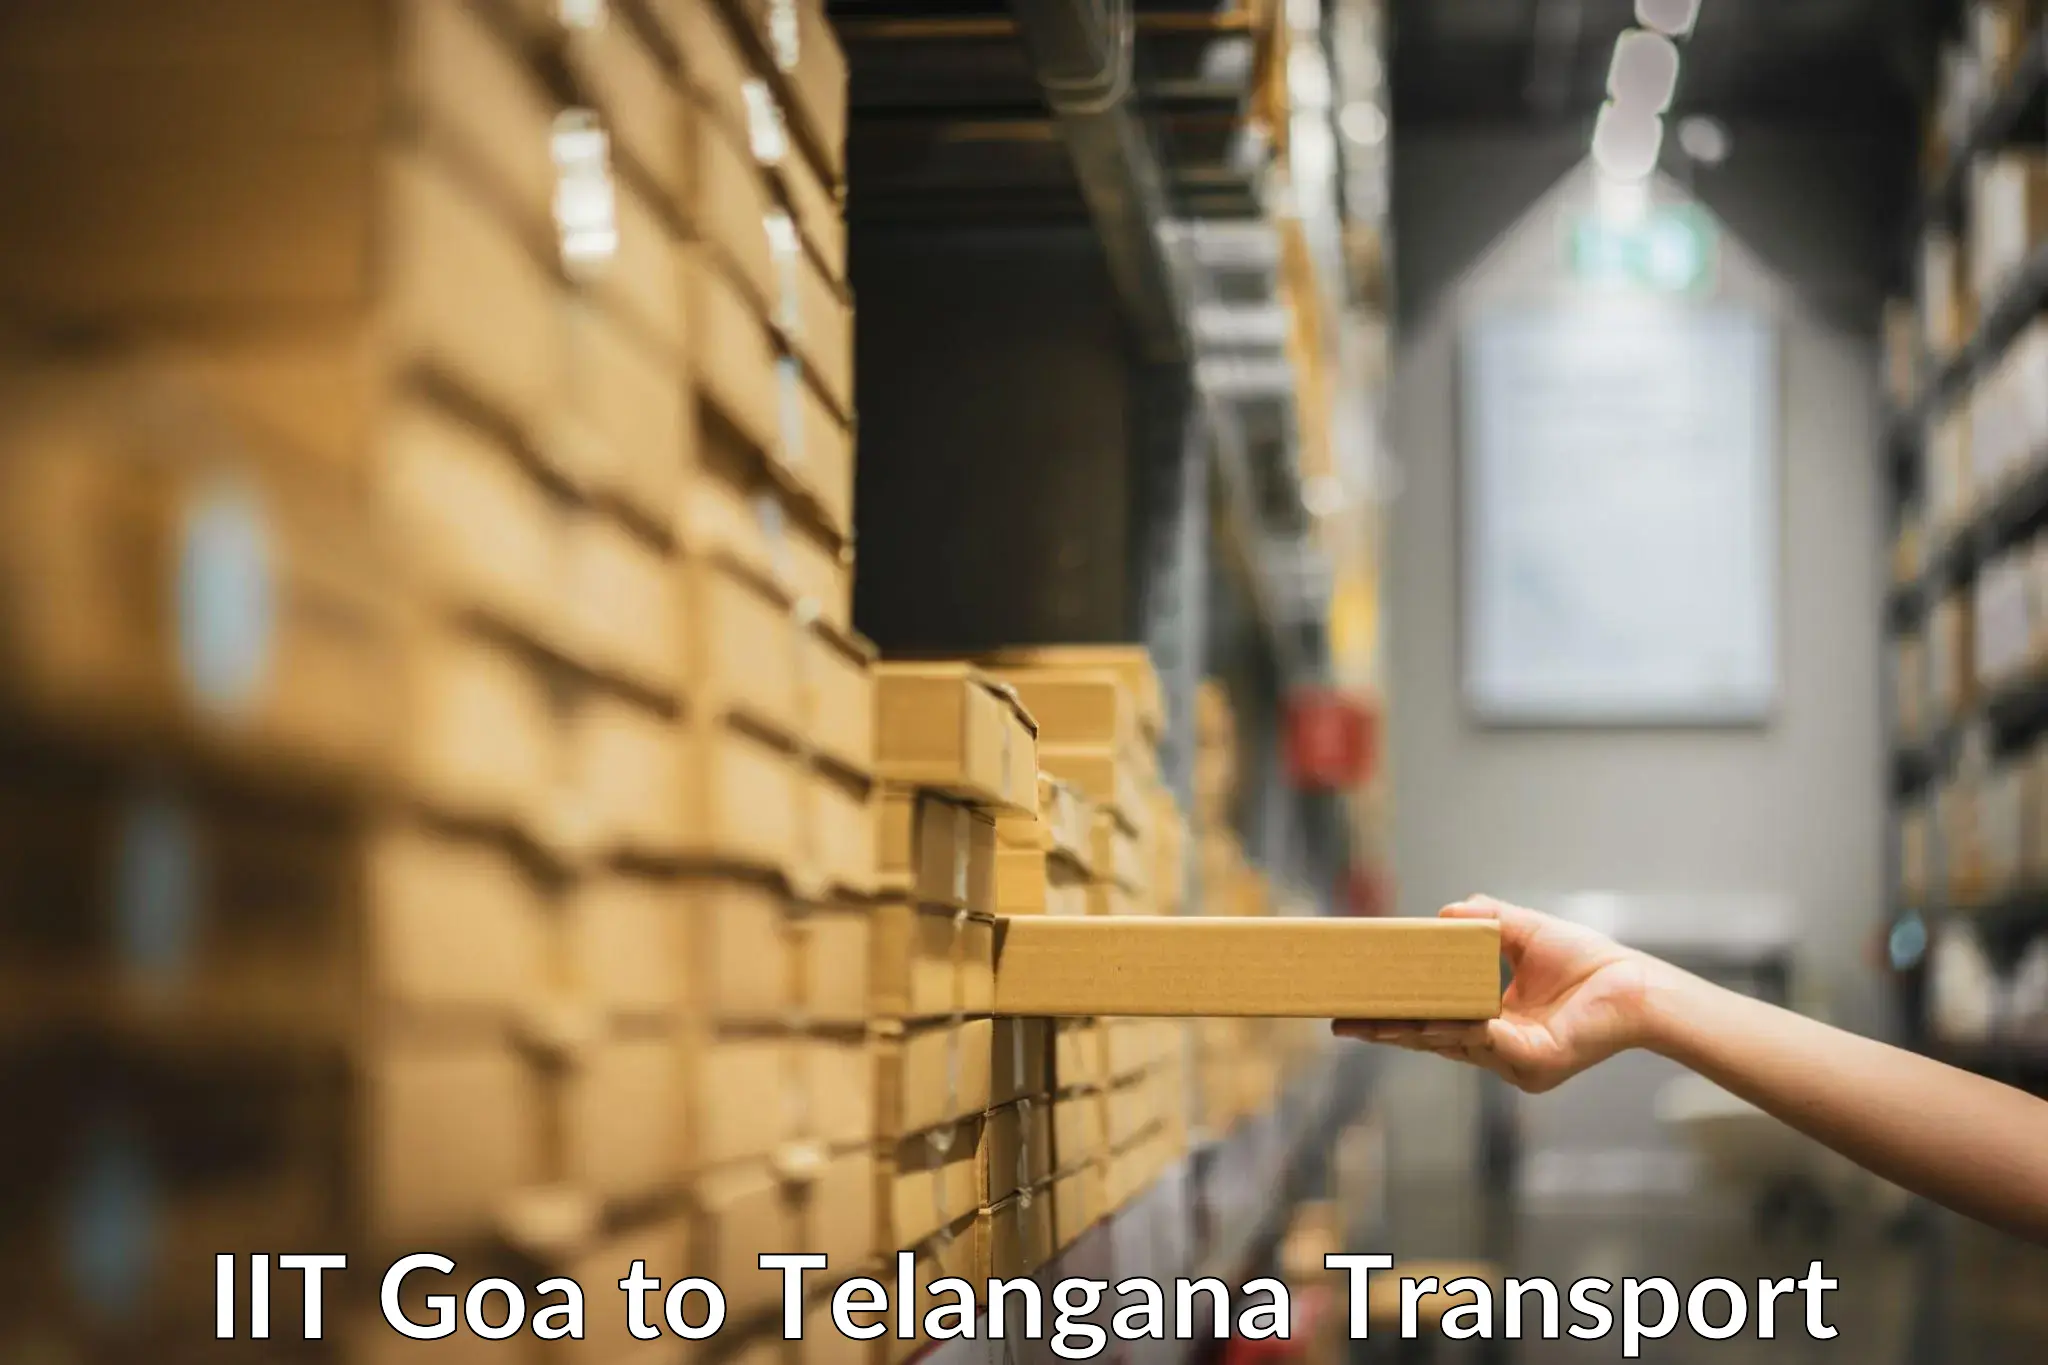 Goods delivery service IIT Goa to Bhainsa